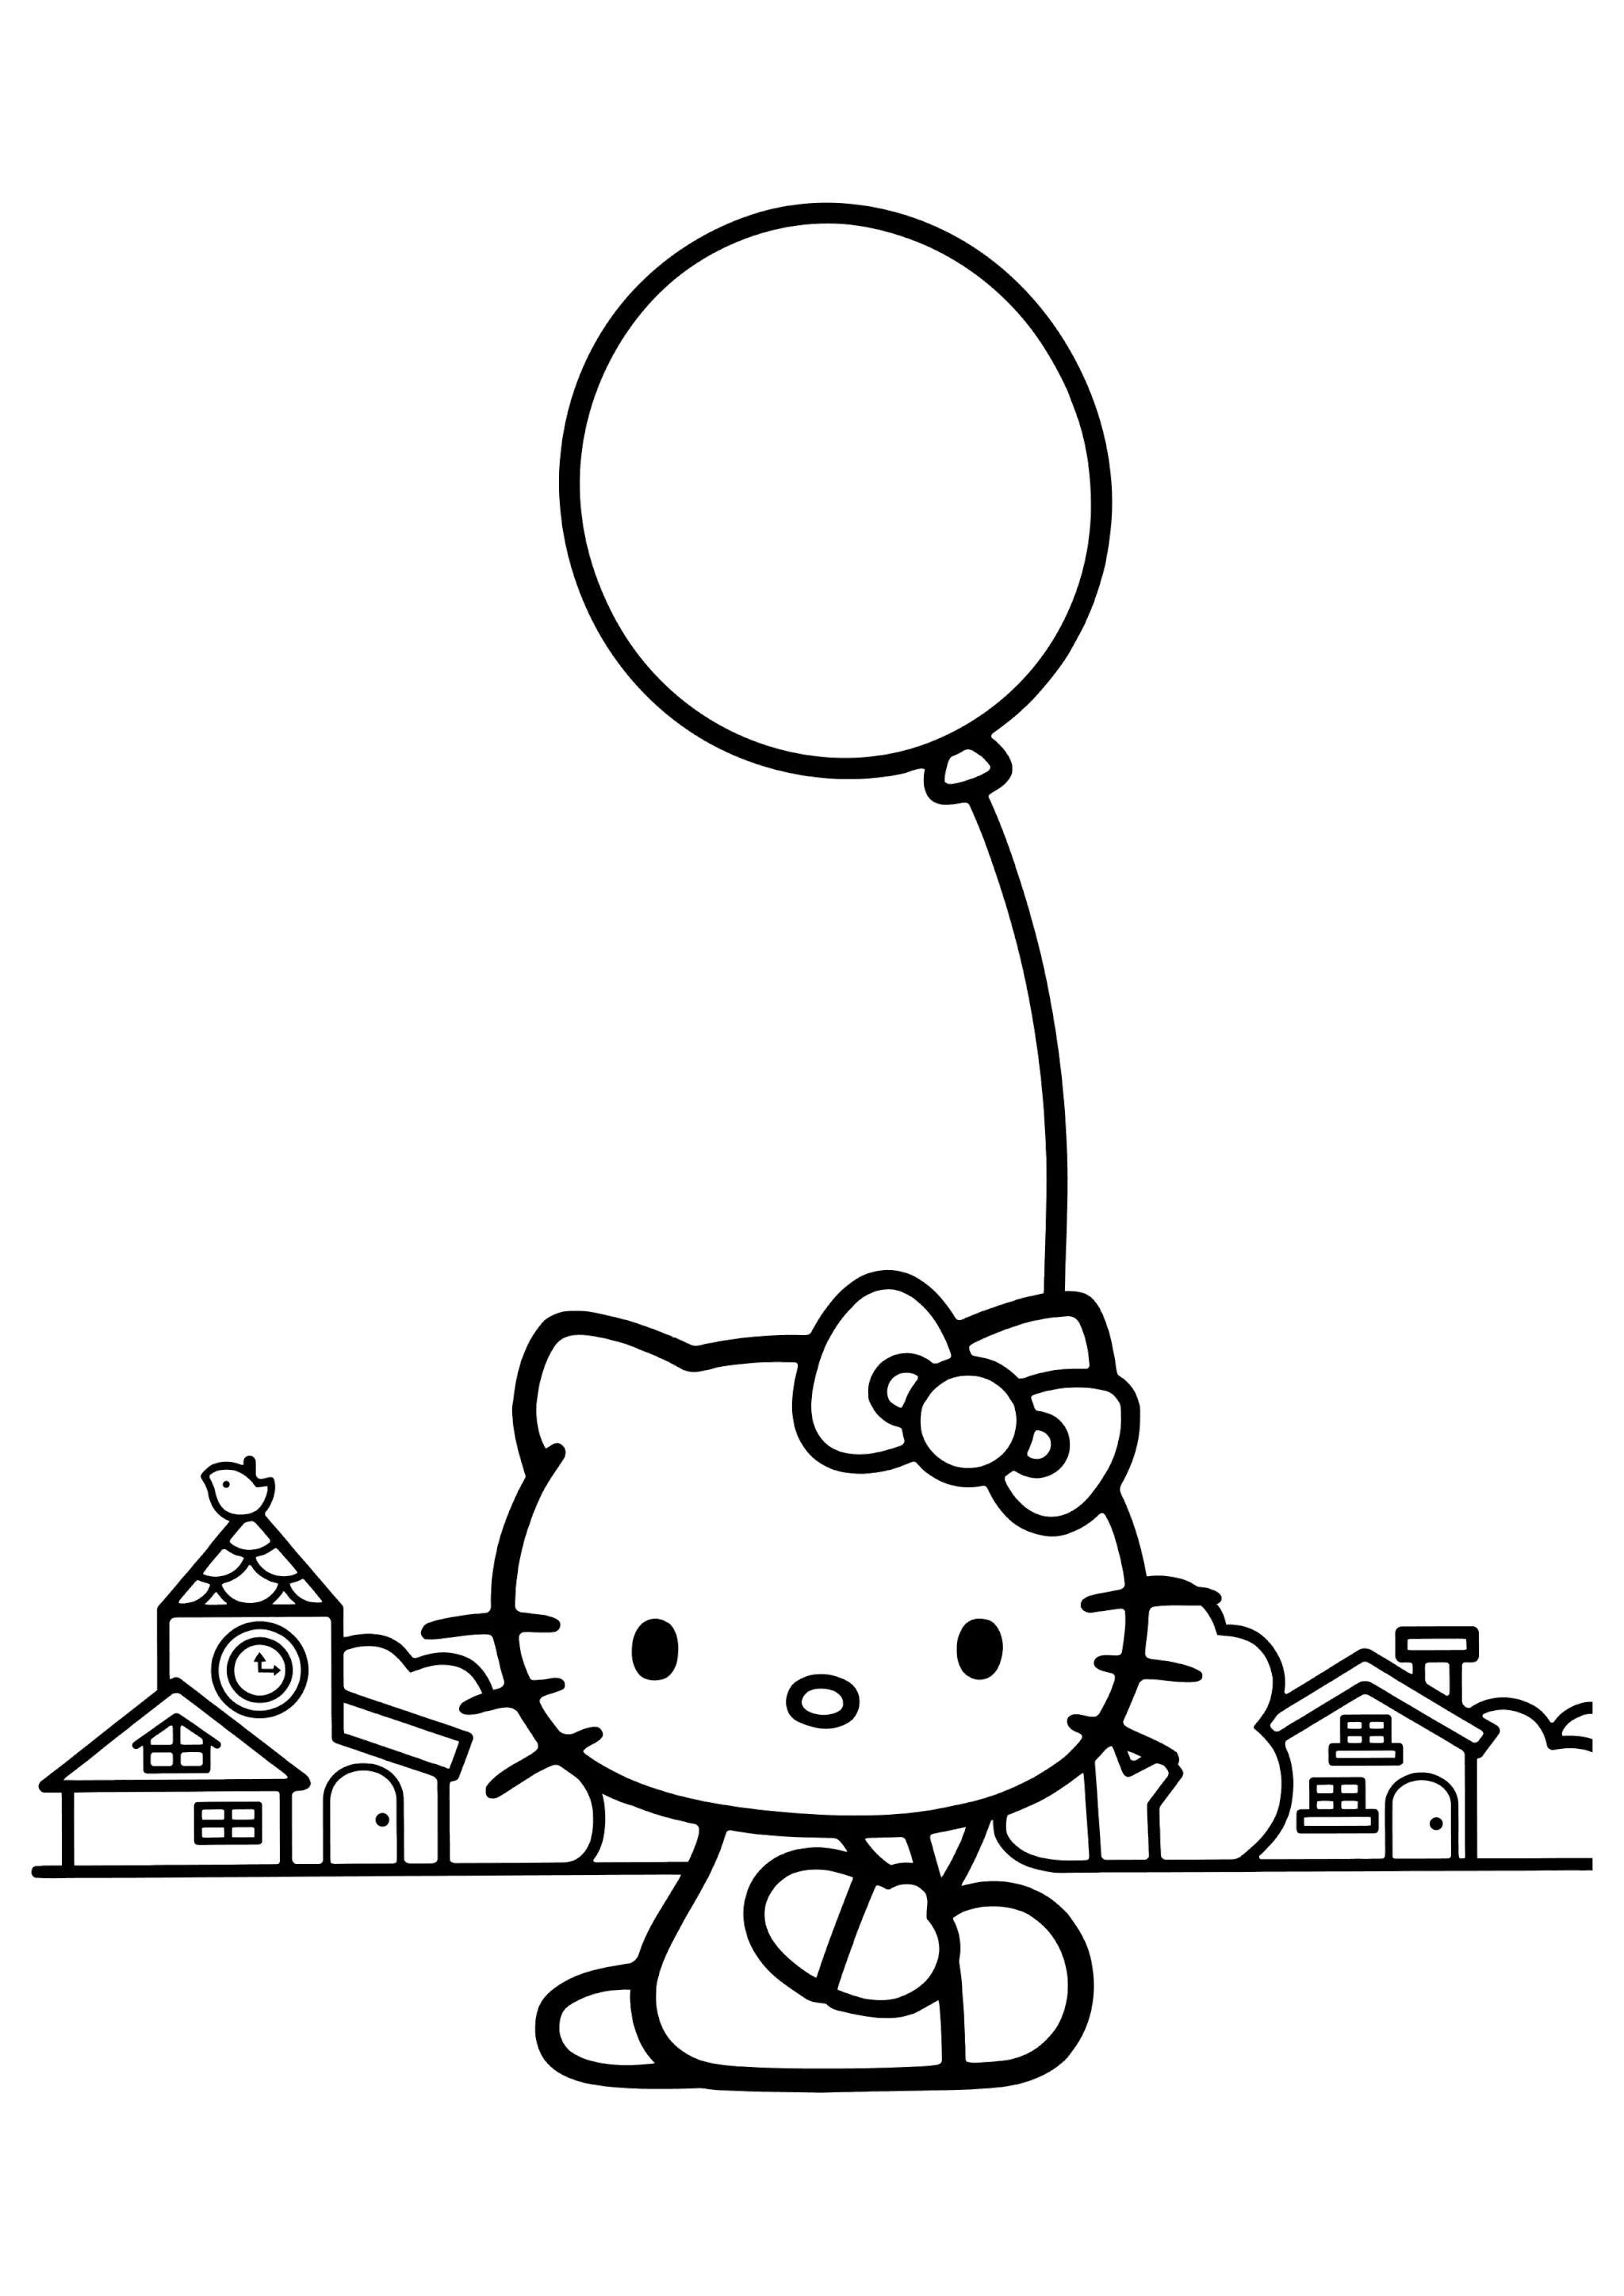 Cat with balloons #7